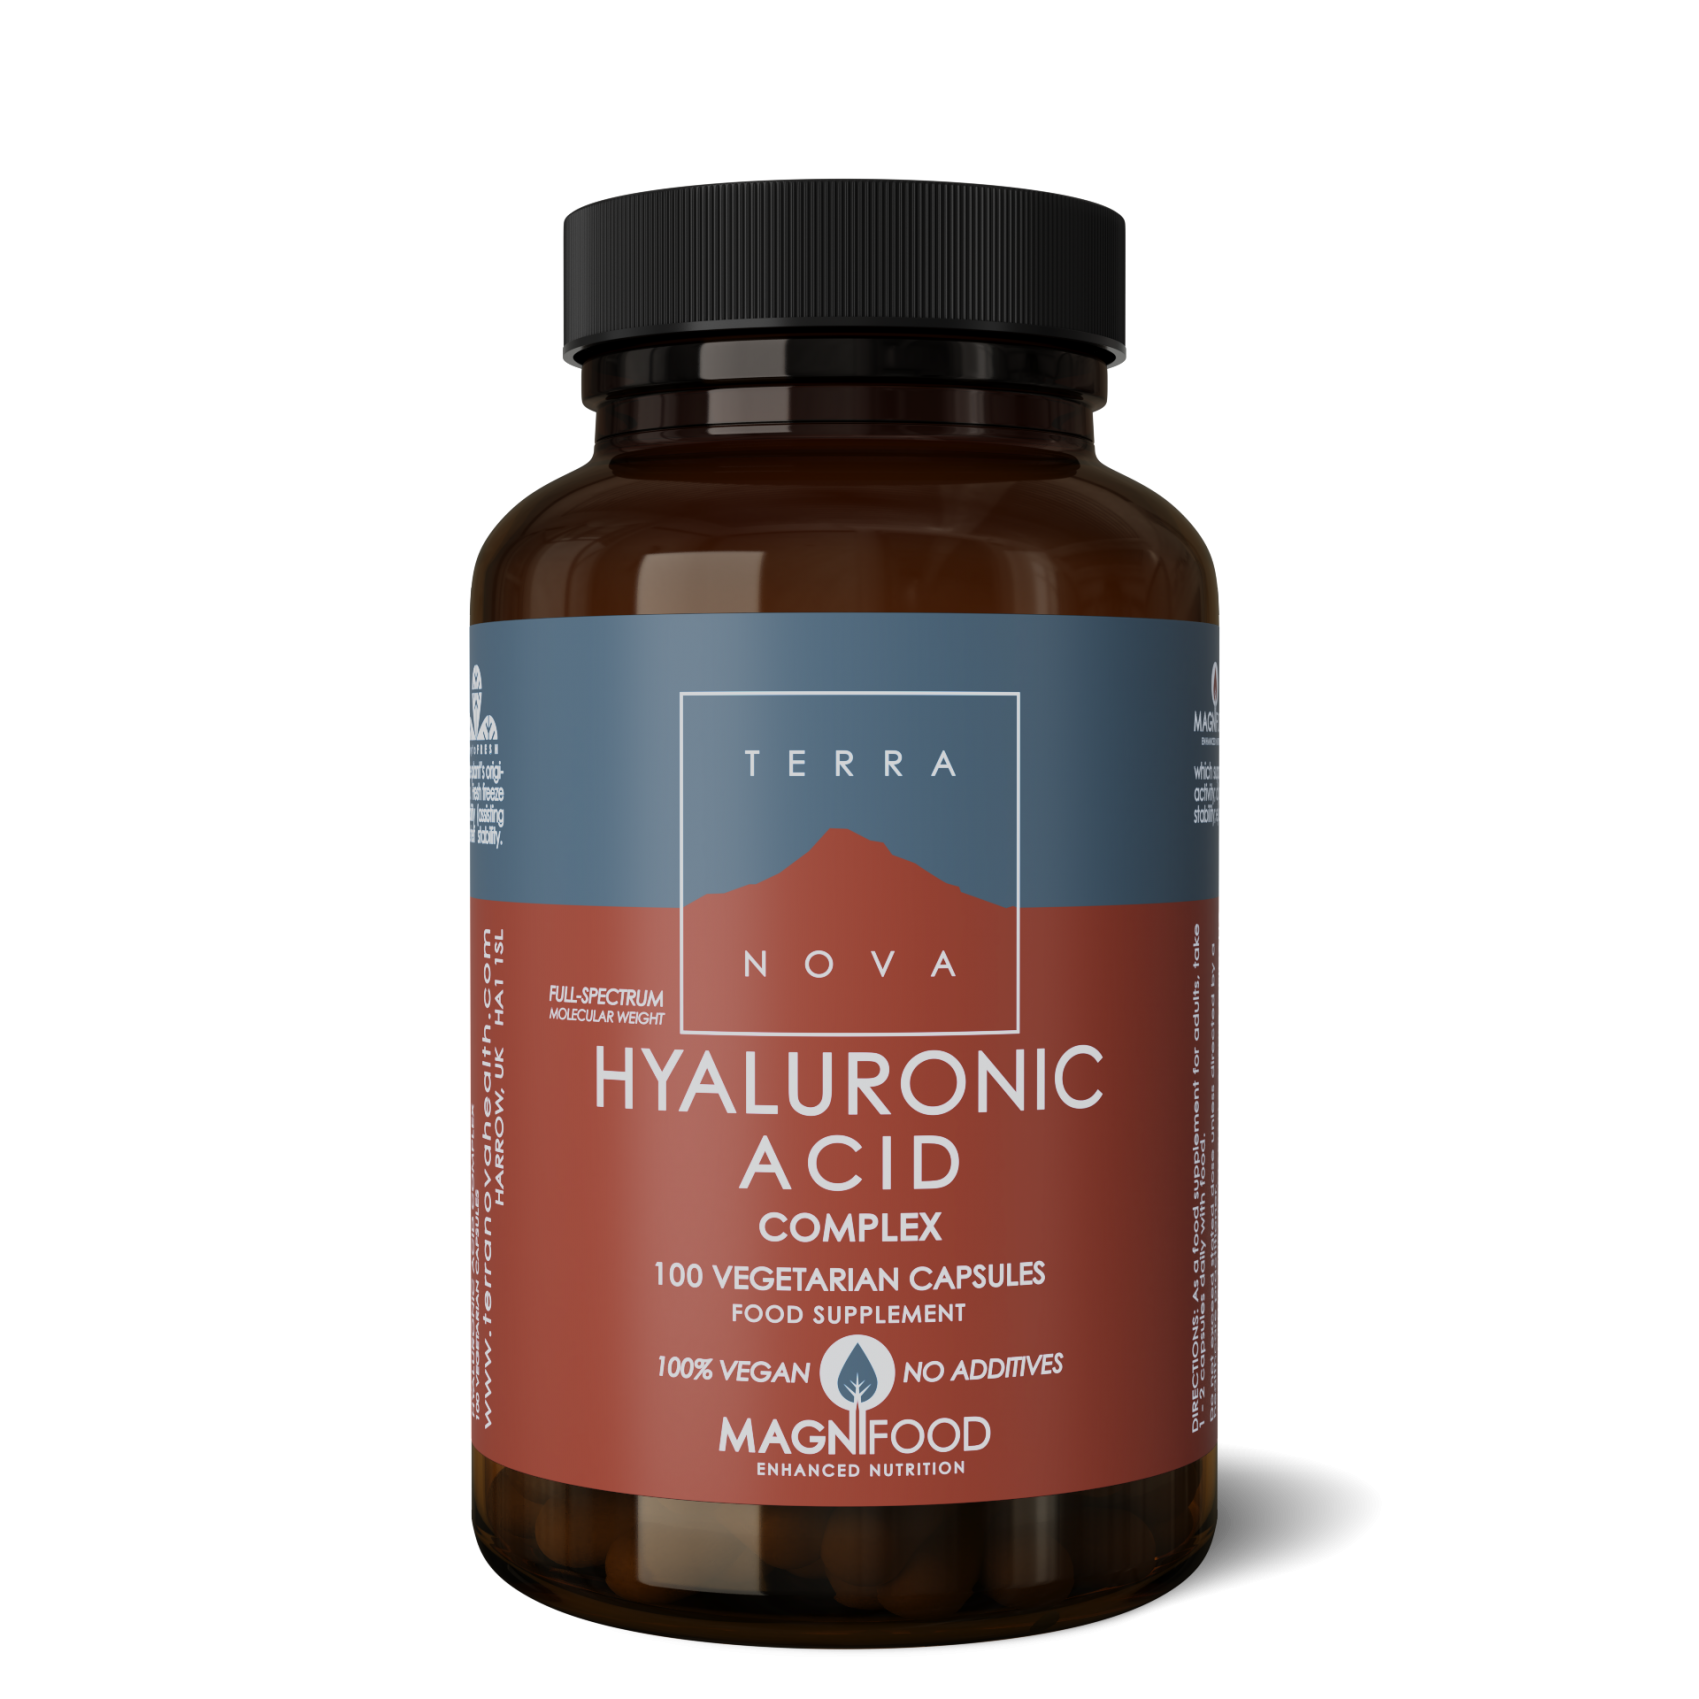 Hyaluronic Acid Complex 100's